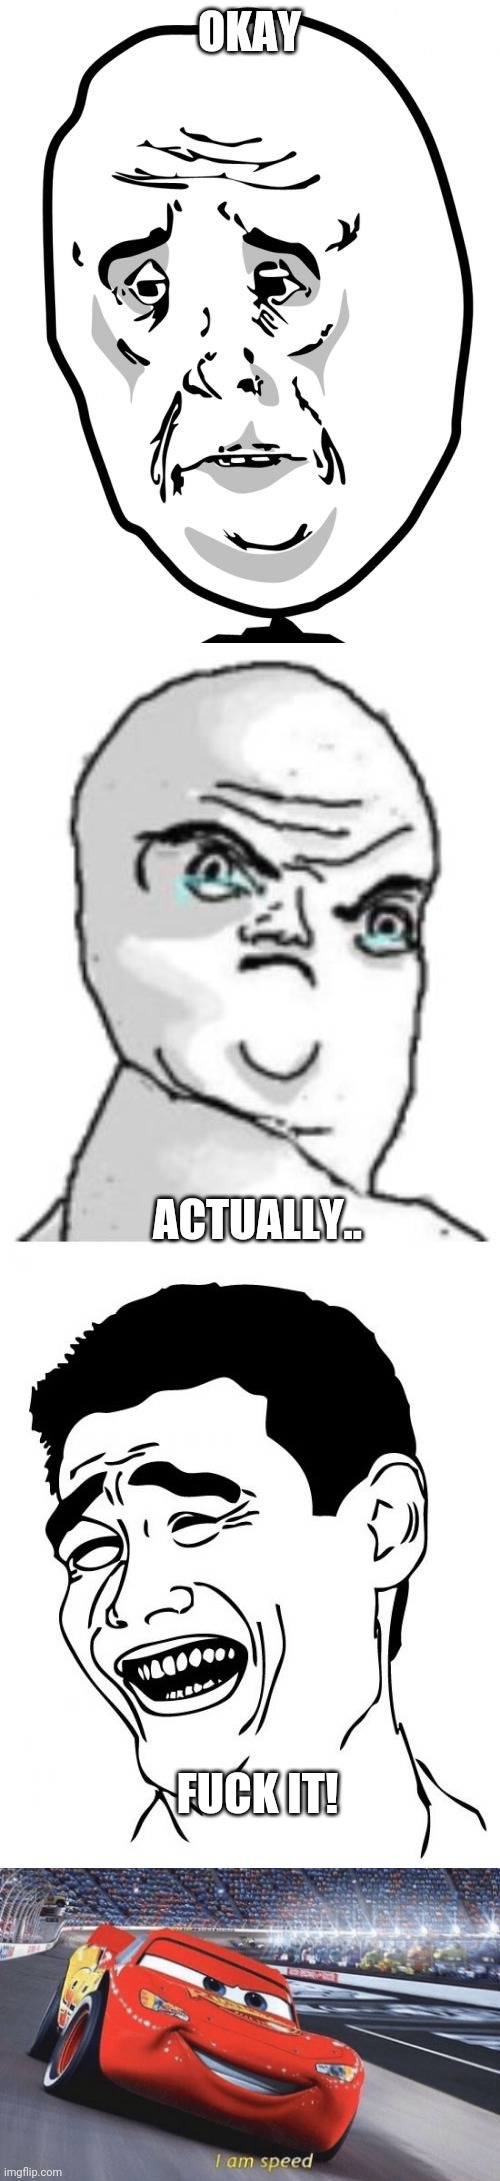 OKAY ACTUALLY.. FUCK IT! | image tagged in memes,okay guy rage face 2,not okay rage face,yao ming,i am speed | made w/ Imgflip meme maker